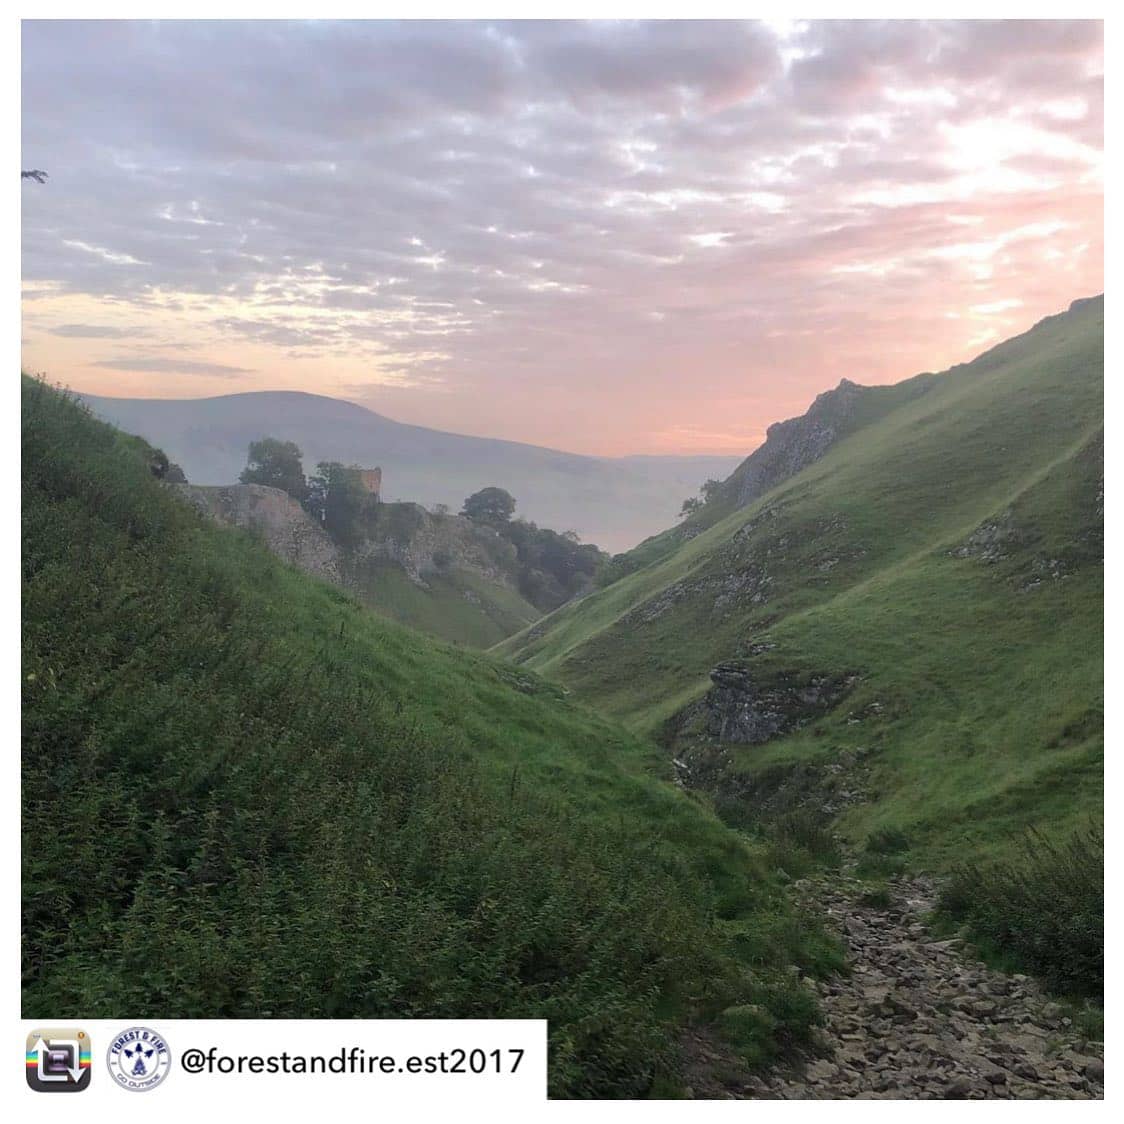 Repost from @forestandfire.est2017- beautiful views of the sunrise on our 75km Challenge, how was...